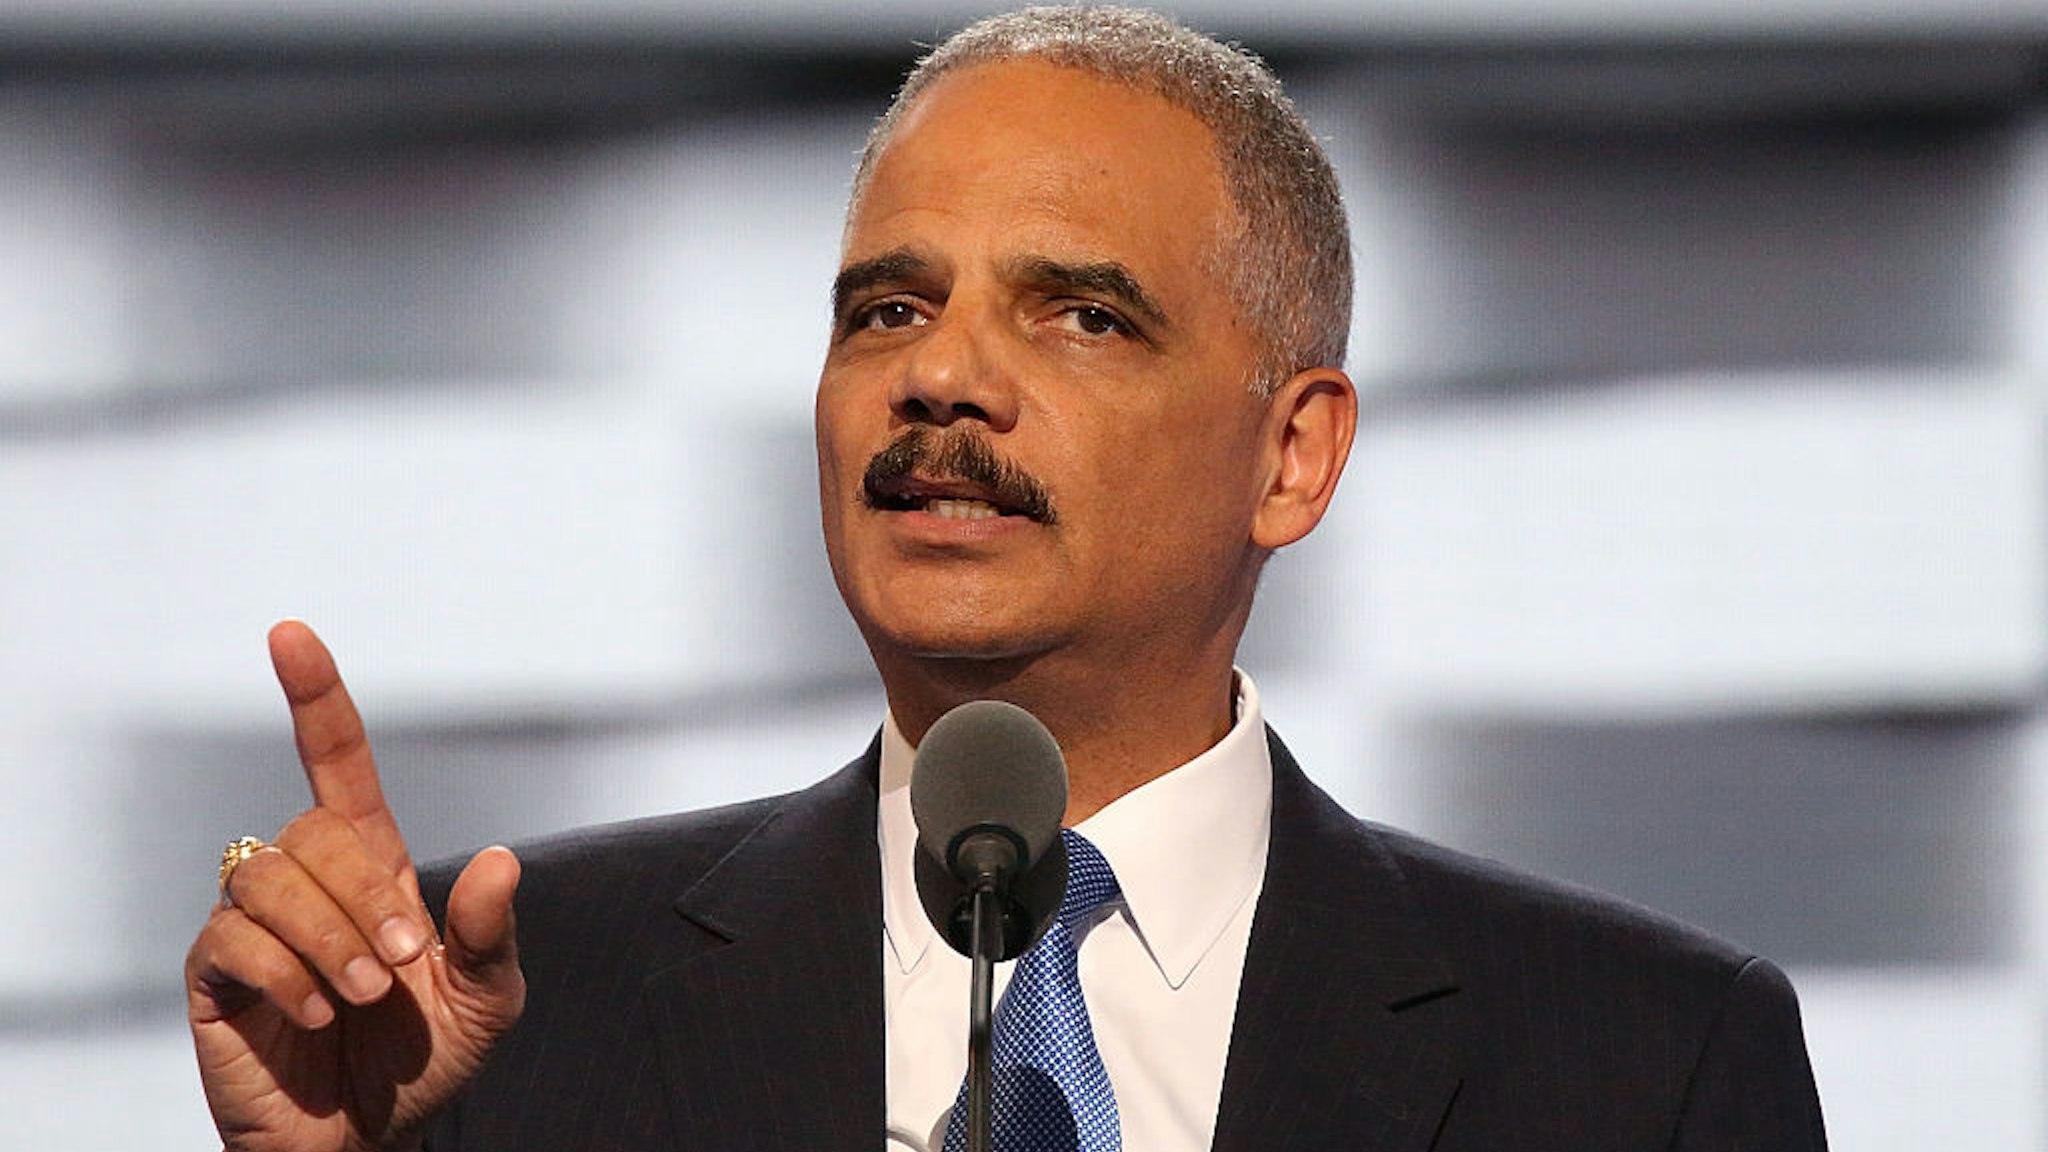 Former U.S. Attorney General Eric Holder delivers remarks at the 2016 Democratic National Convention